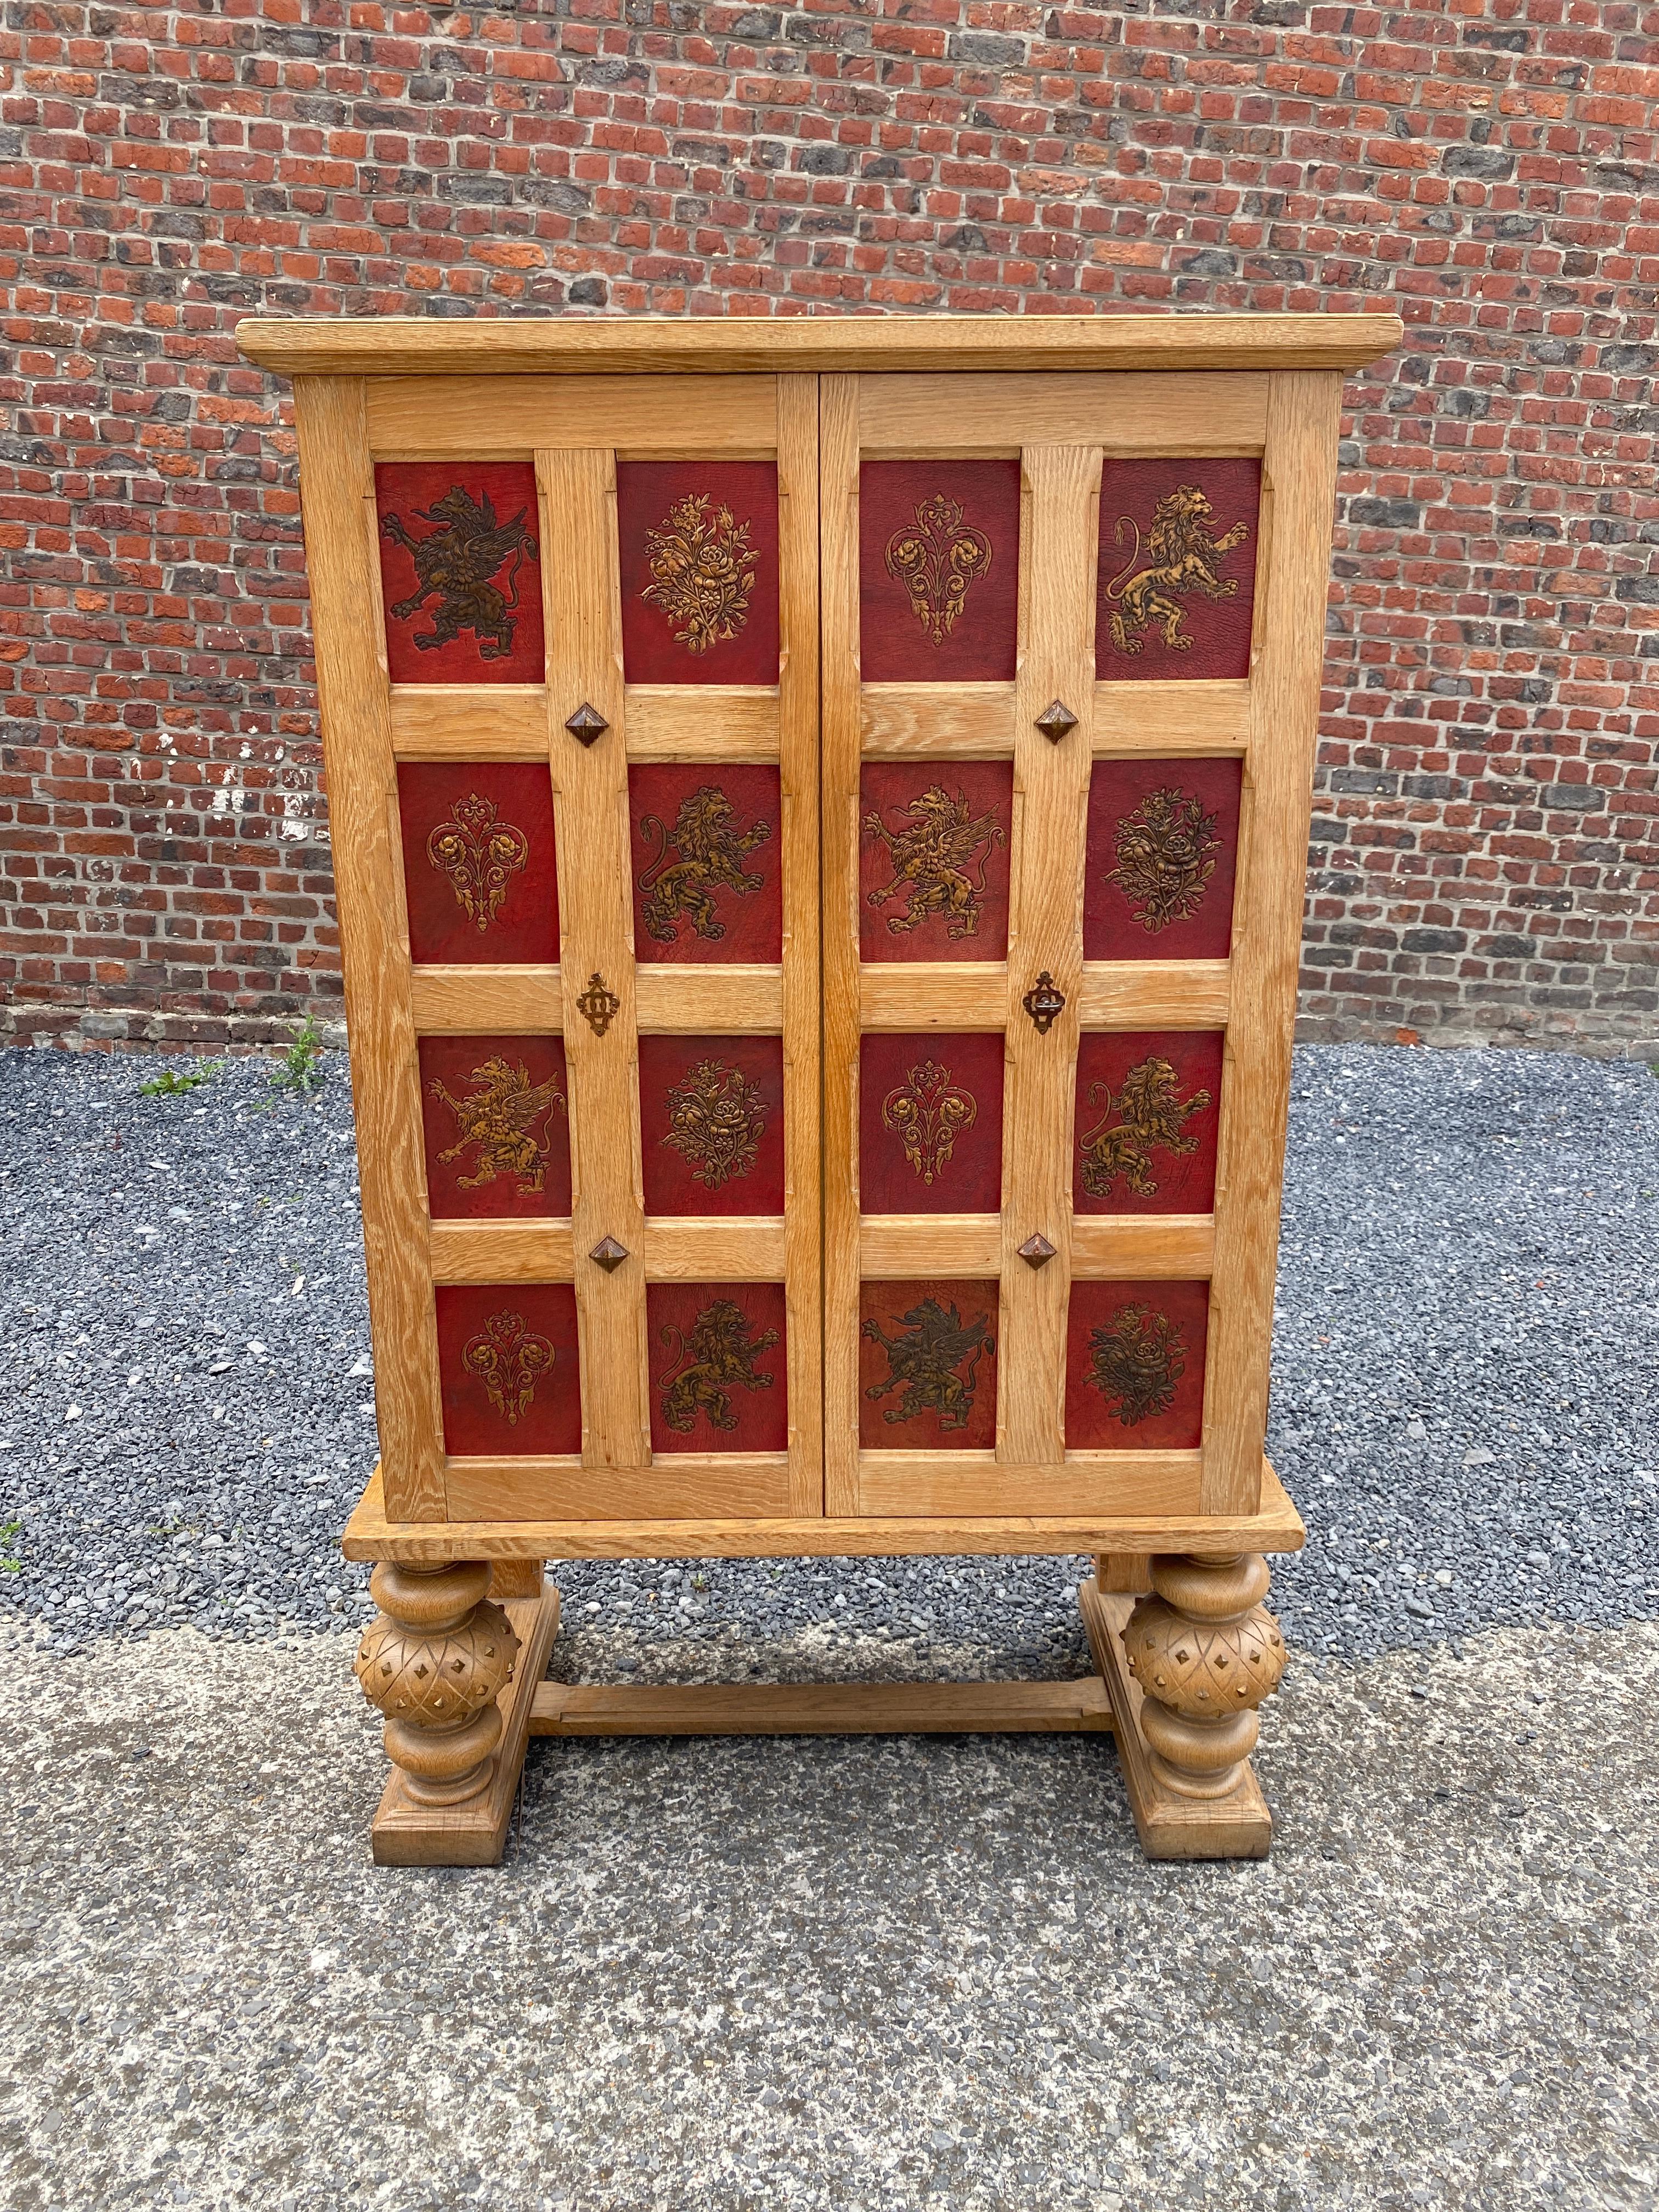 Mid-20th Century Art Deco Cabinet in Oak and Embossed and Gilded Leather, circa 1940-1950 For Sale